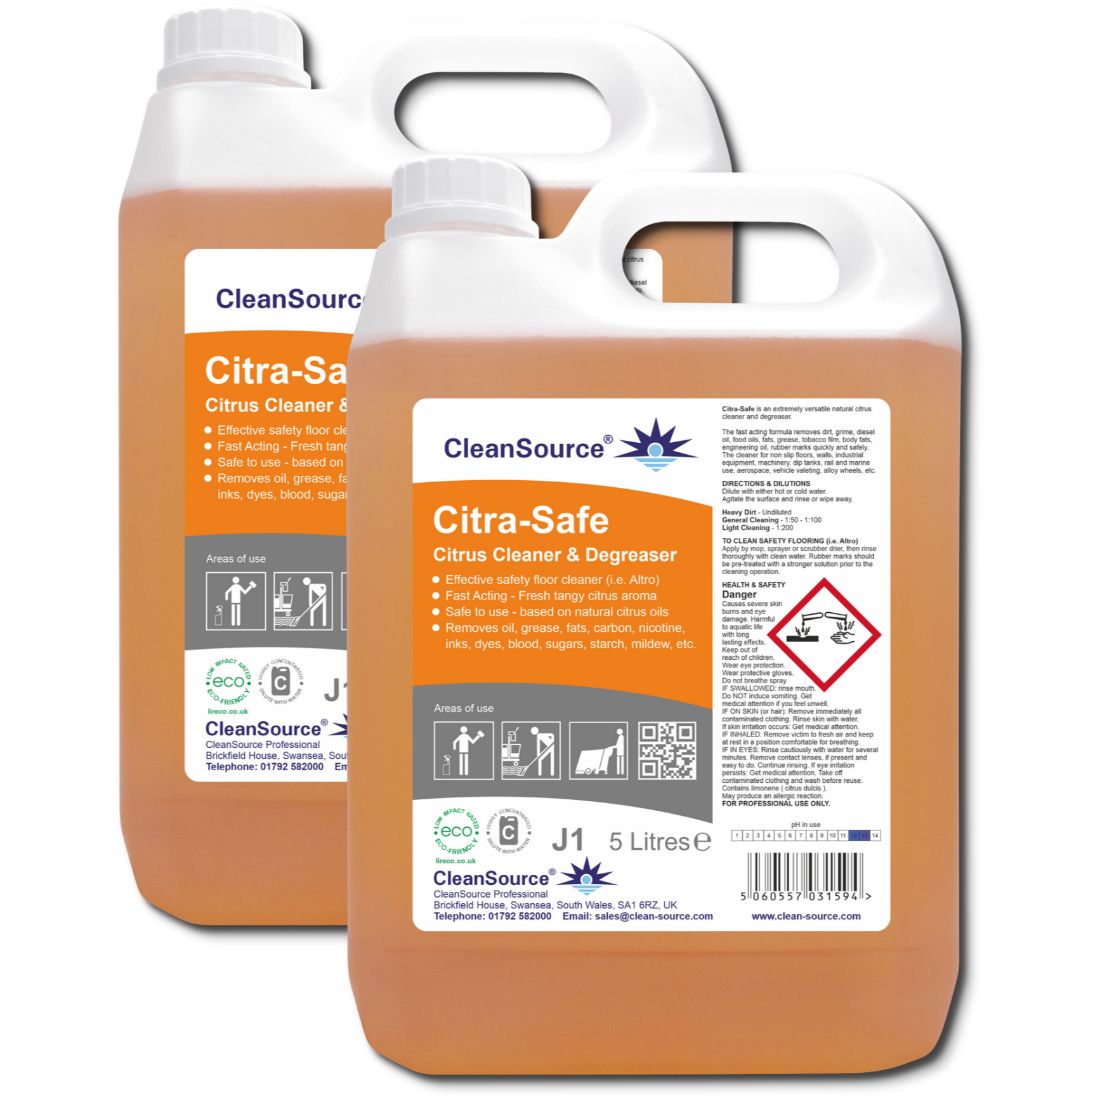 Floor & Wall Cleaner 2x5L